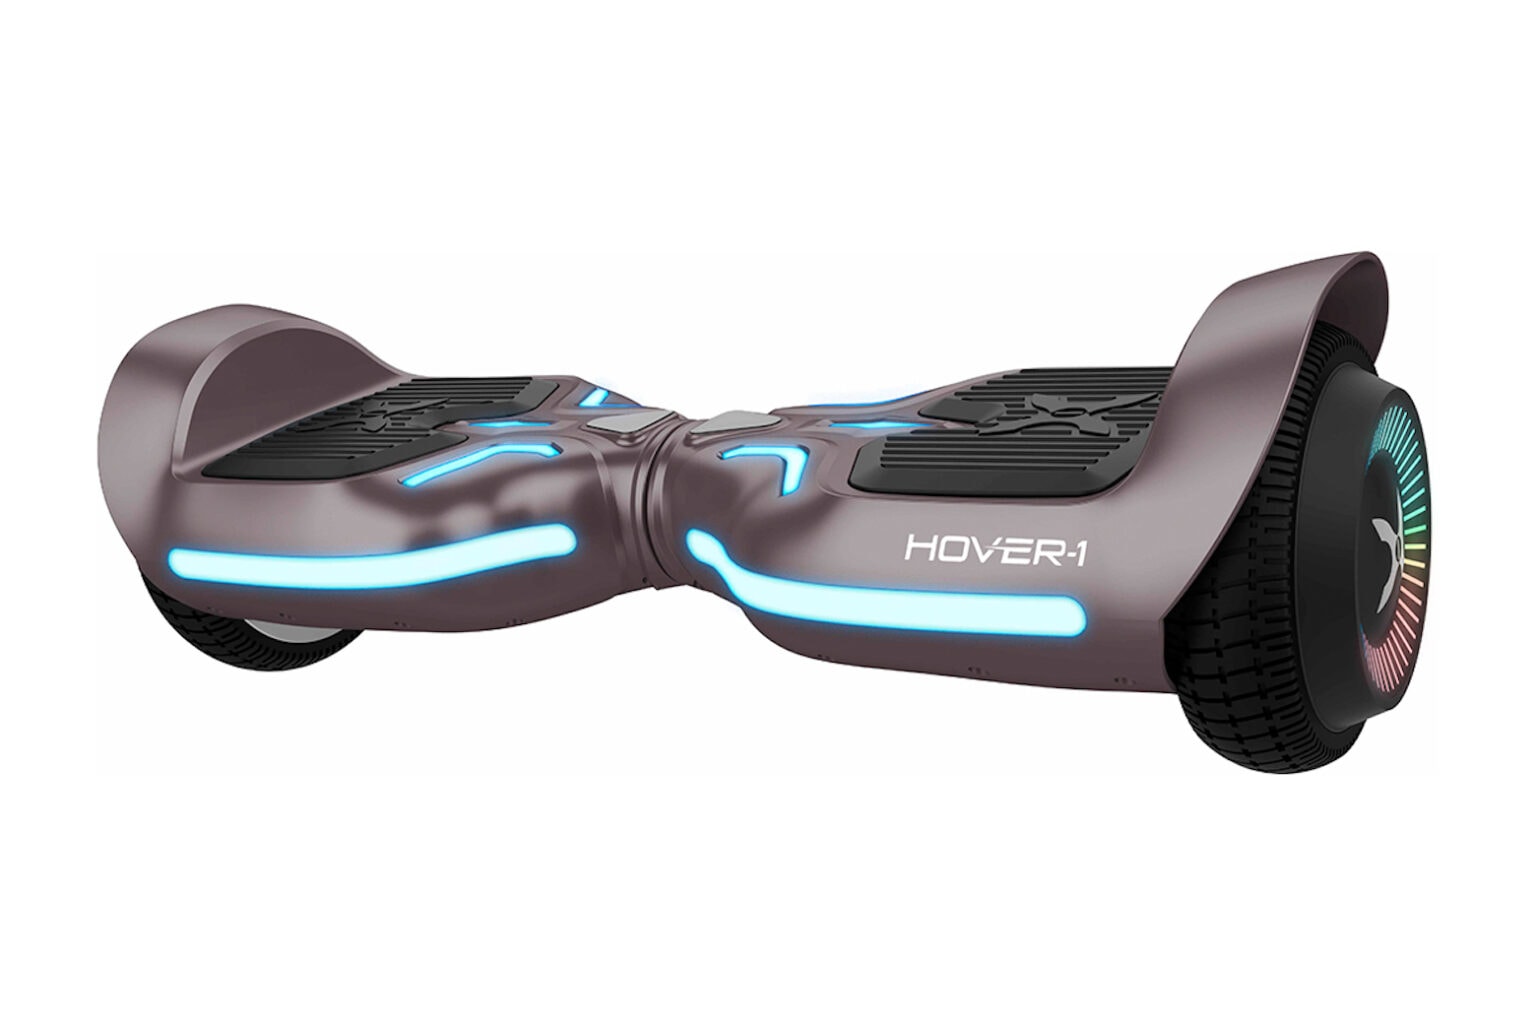 Grab a hoverboard that's fun for the family and 43% off.